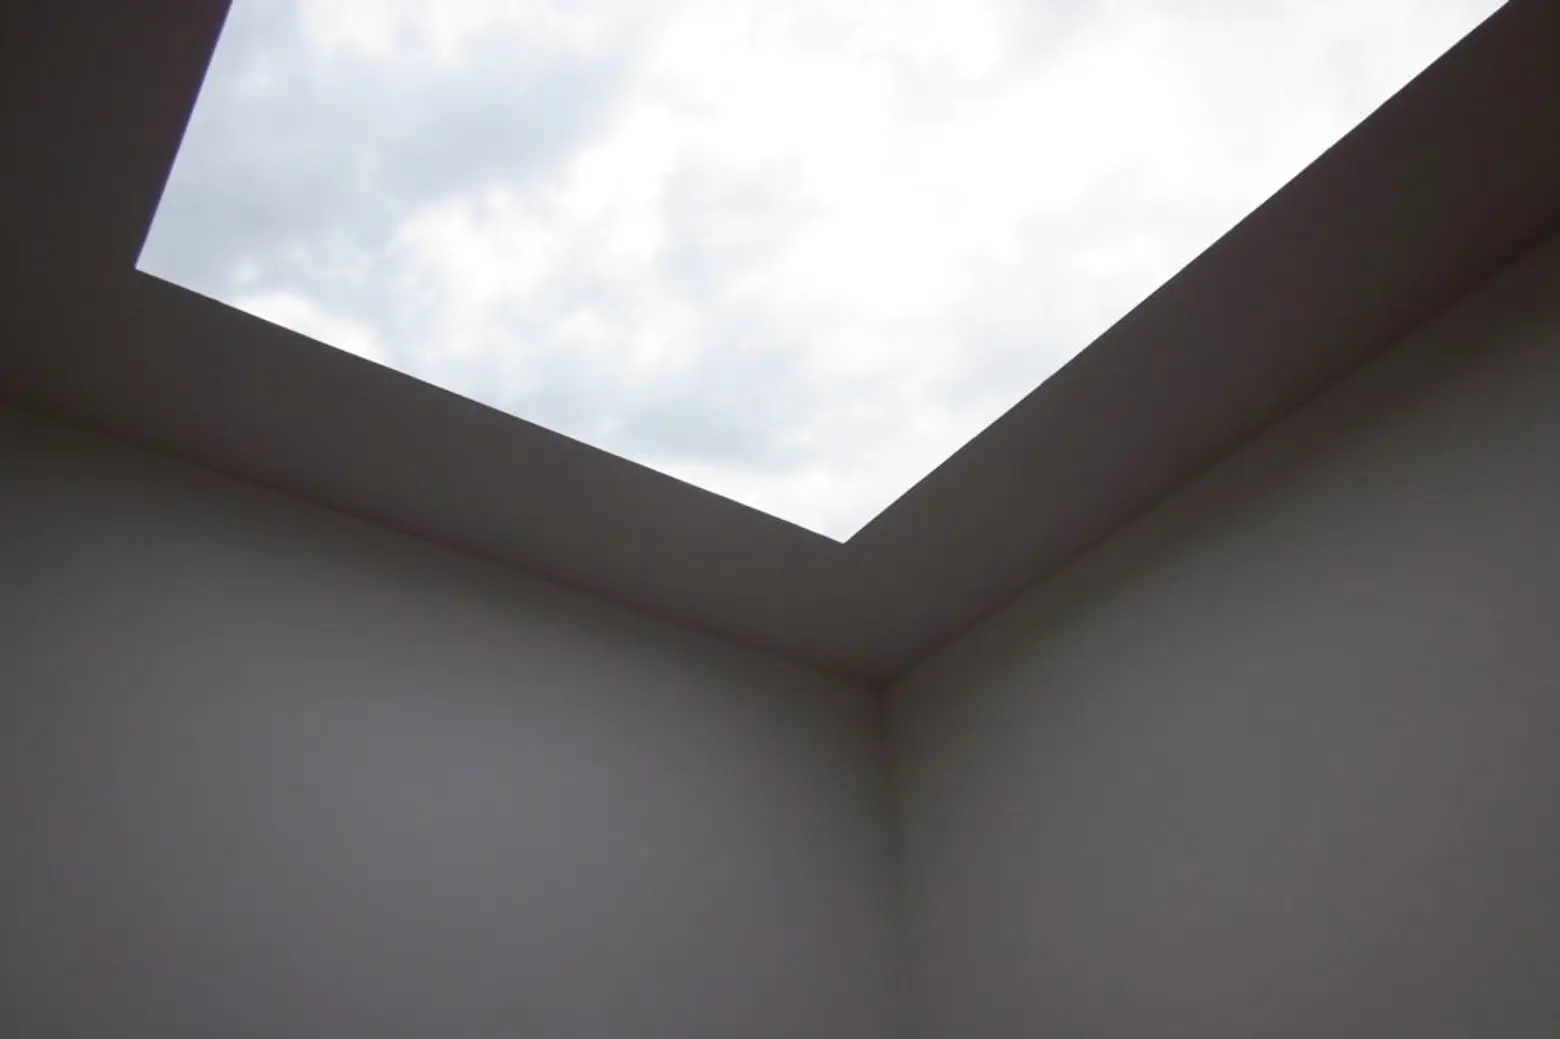 James Turrell installation reopens at MoMA PS1 after nearby construction impedes views